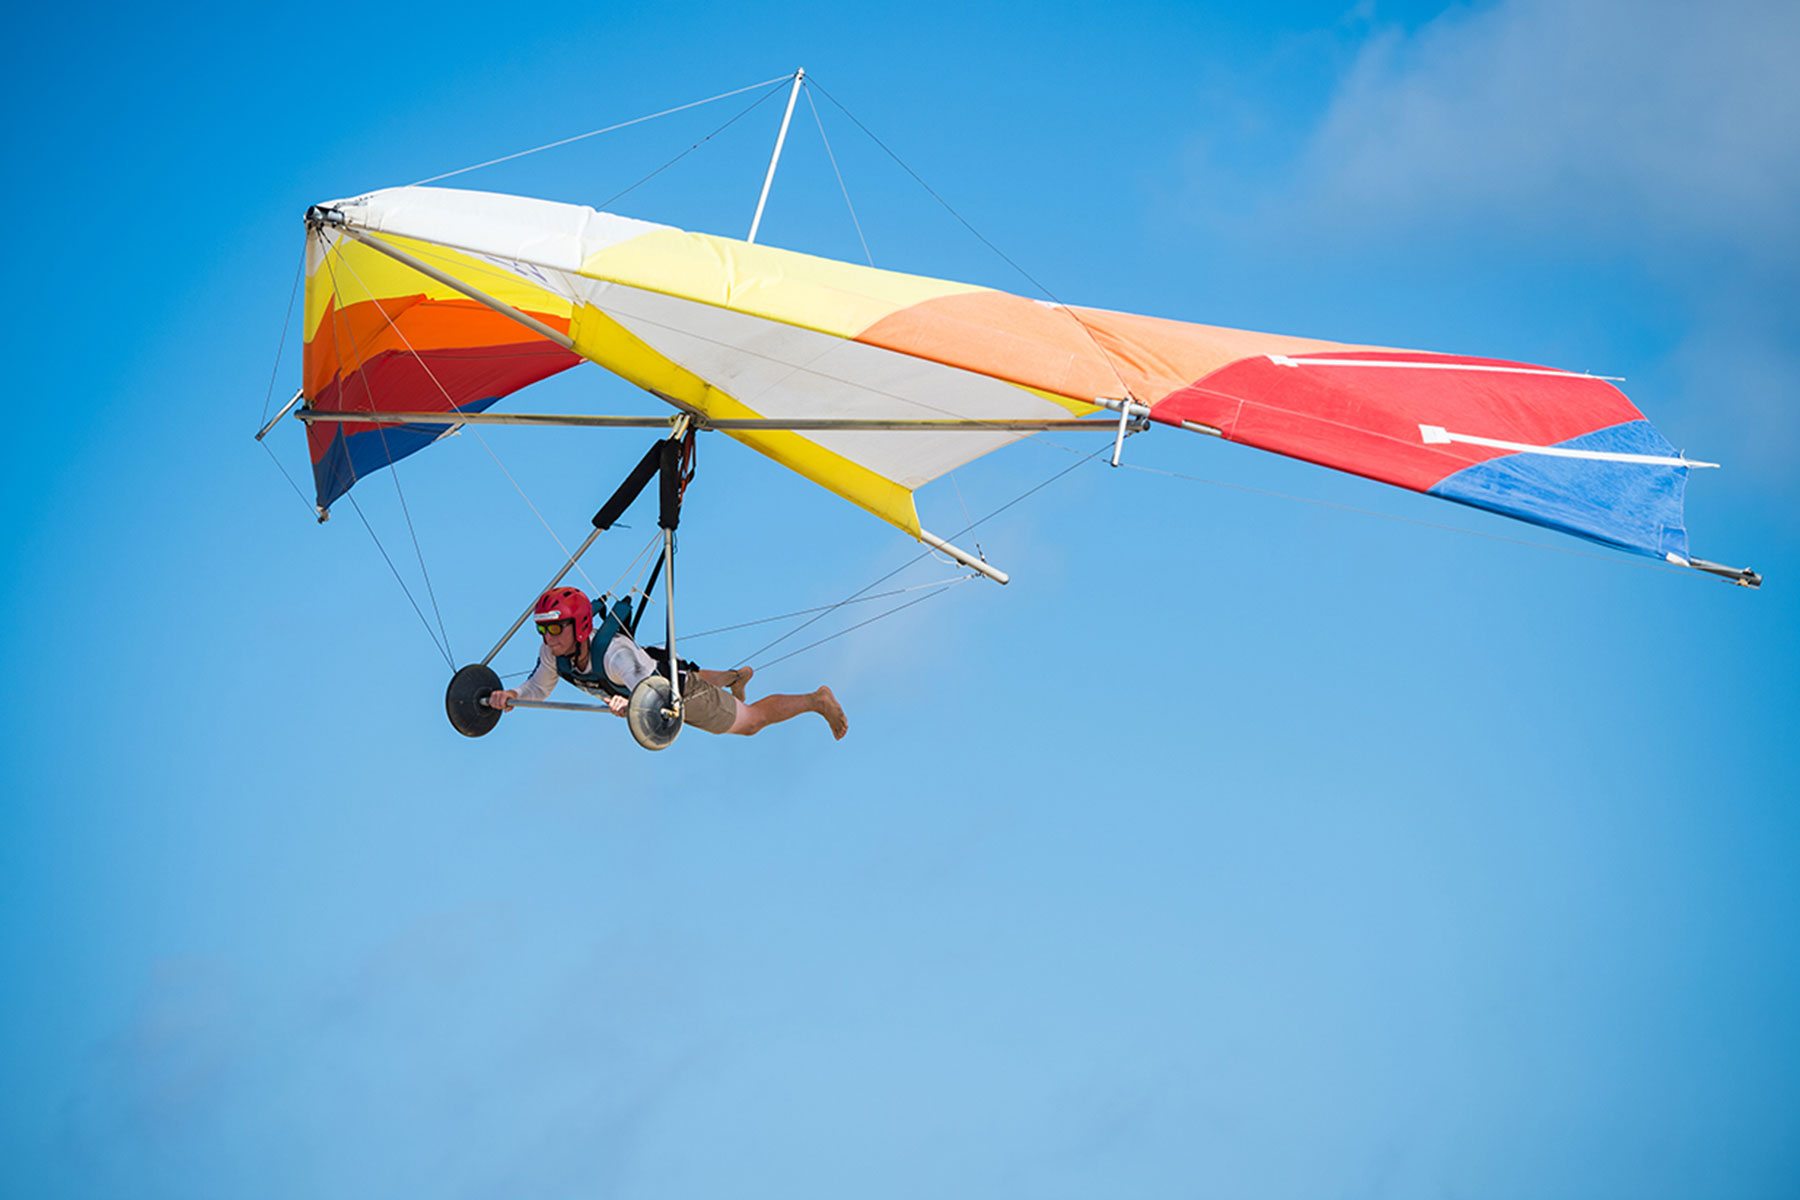 Global Hang-Glider market was valued at 101.14 Million US$ in 2018 and is projected to reach 140.41 Million US$ by 2024